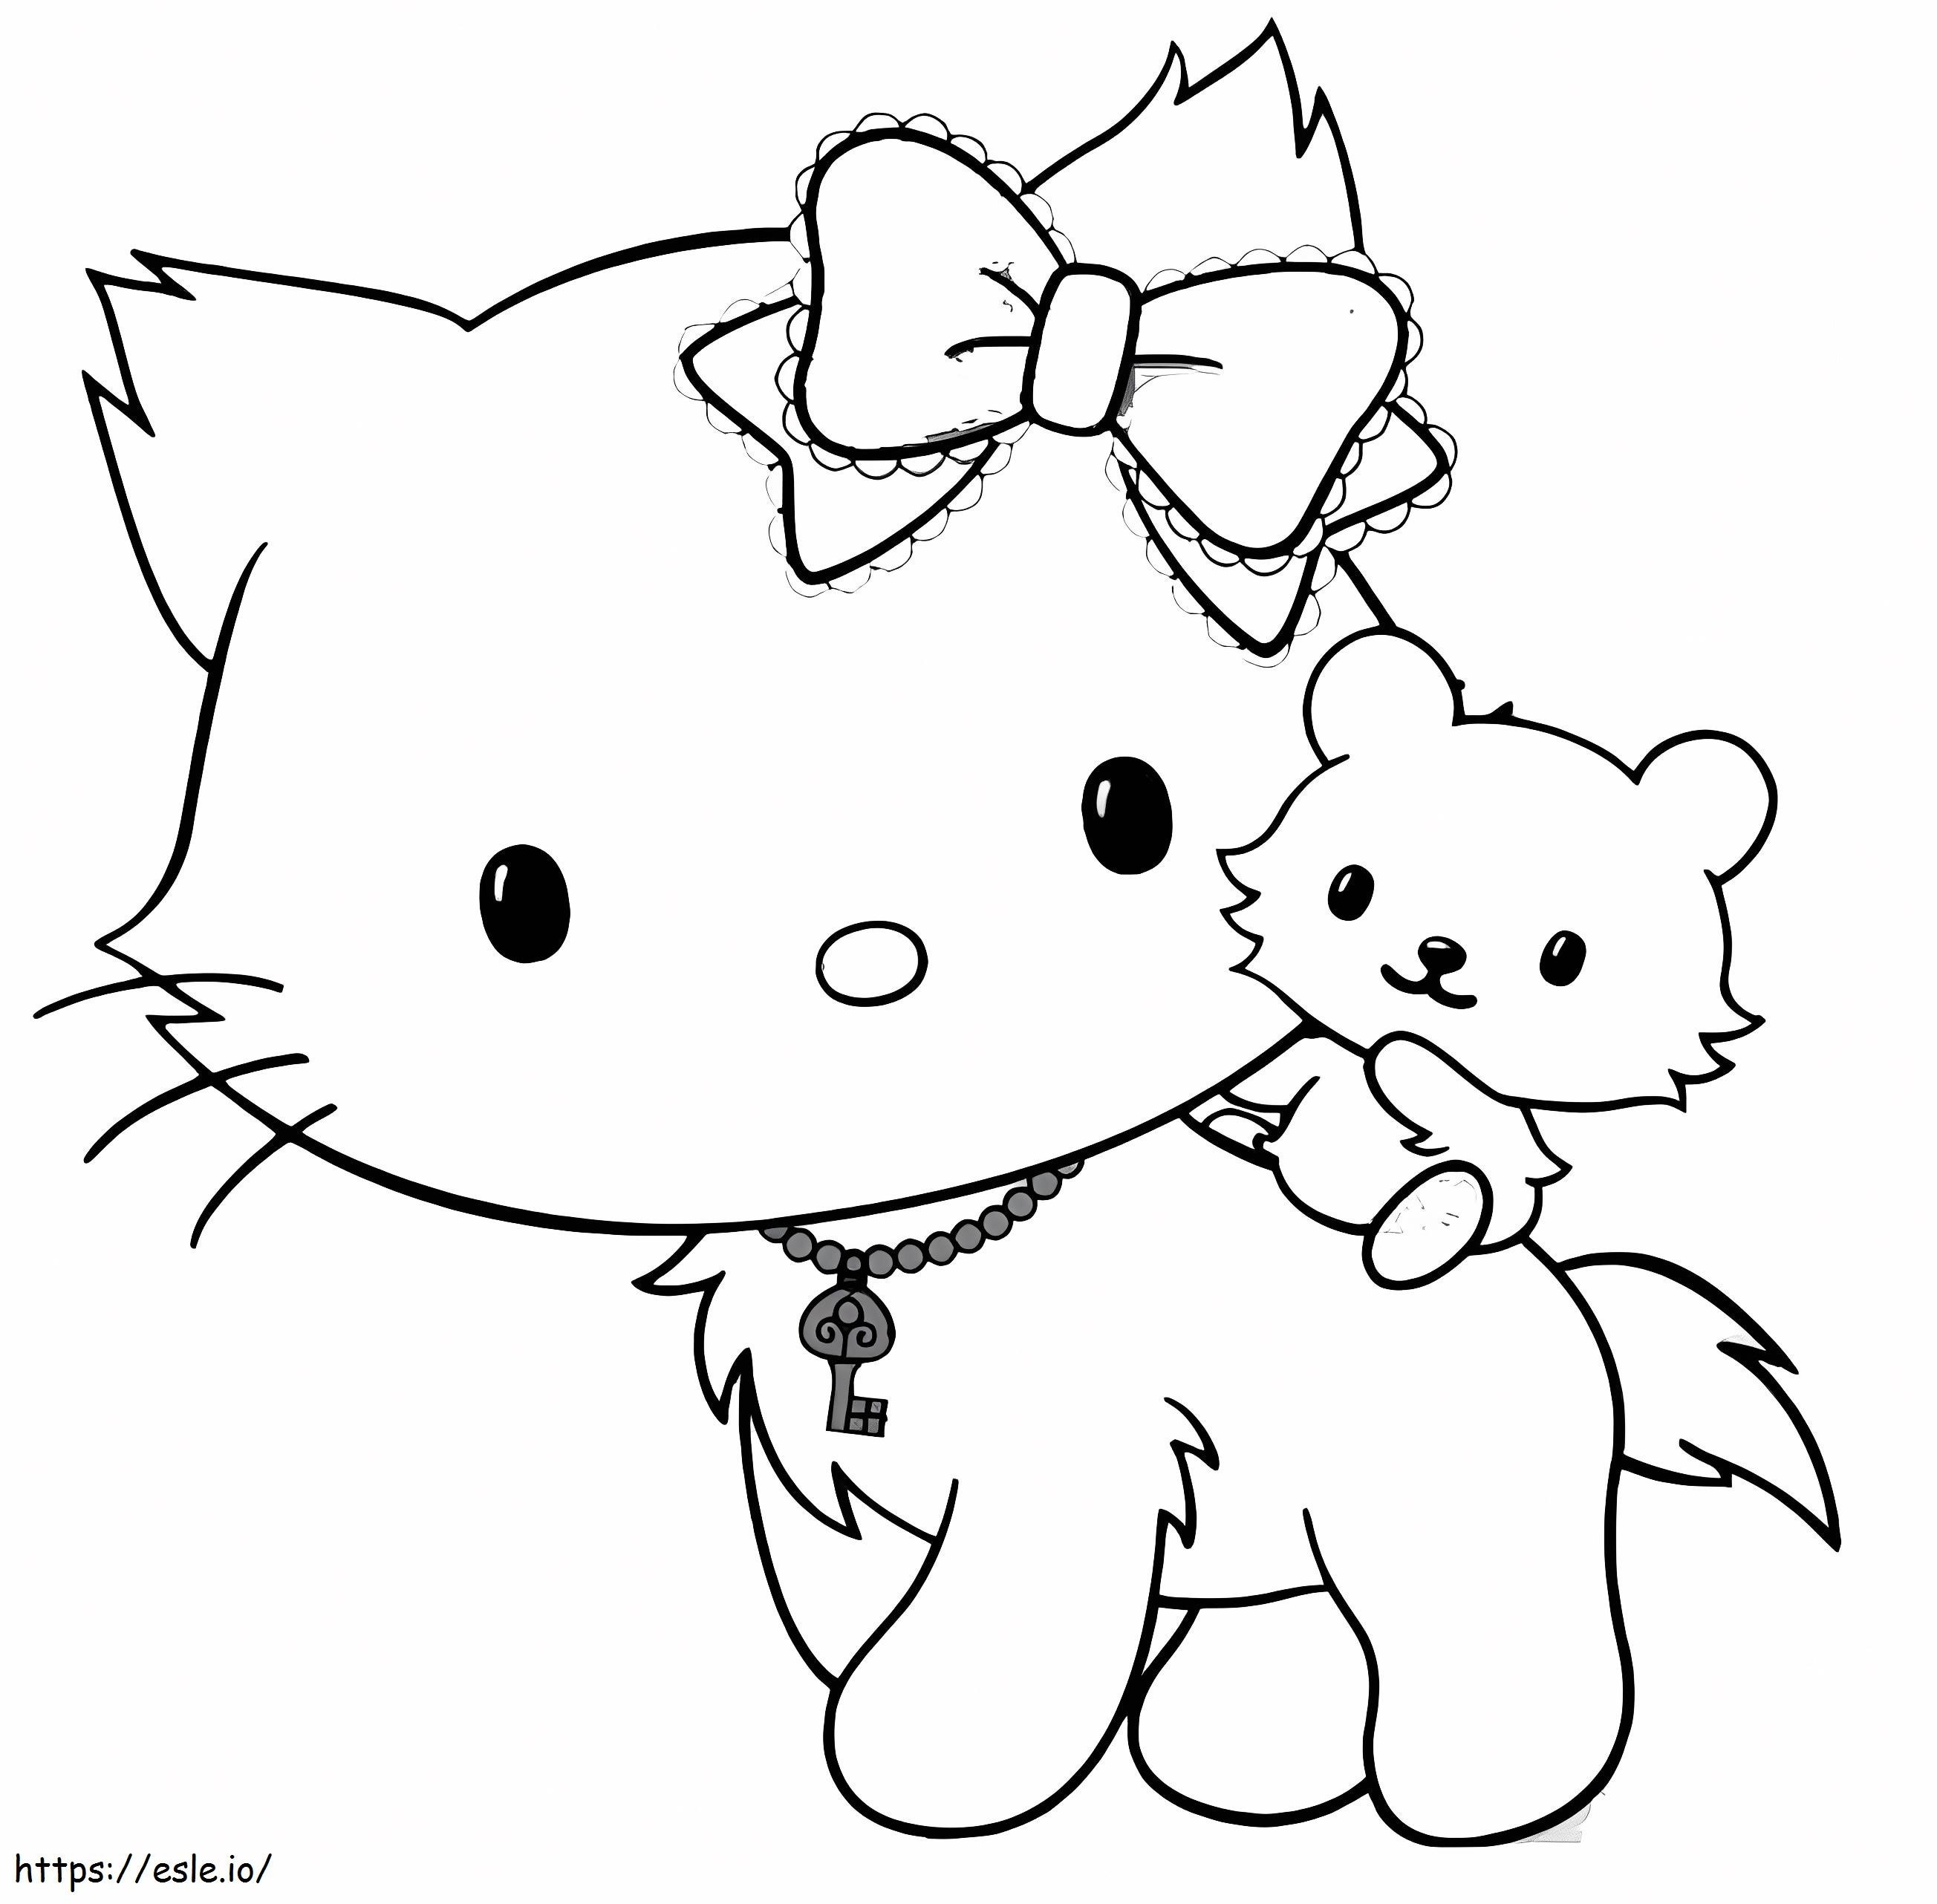 Lovely Charmy Kitty coloring page